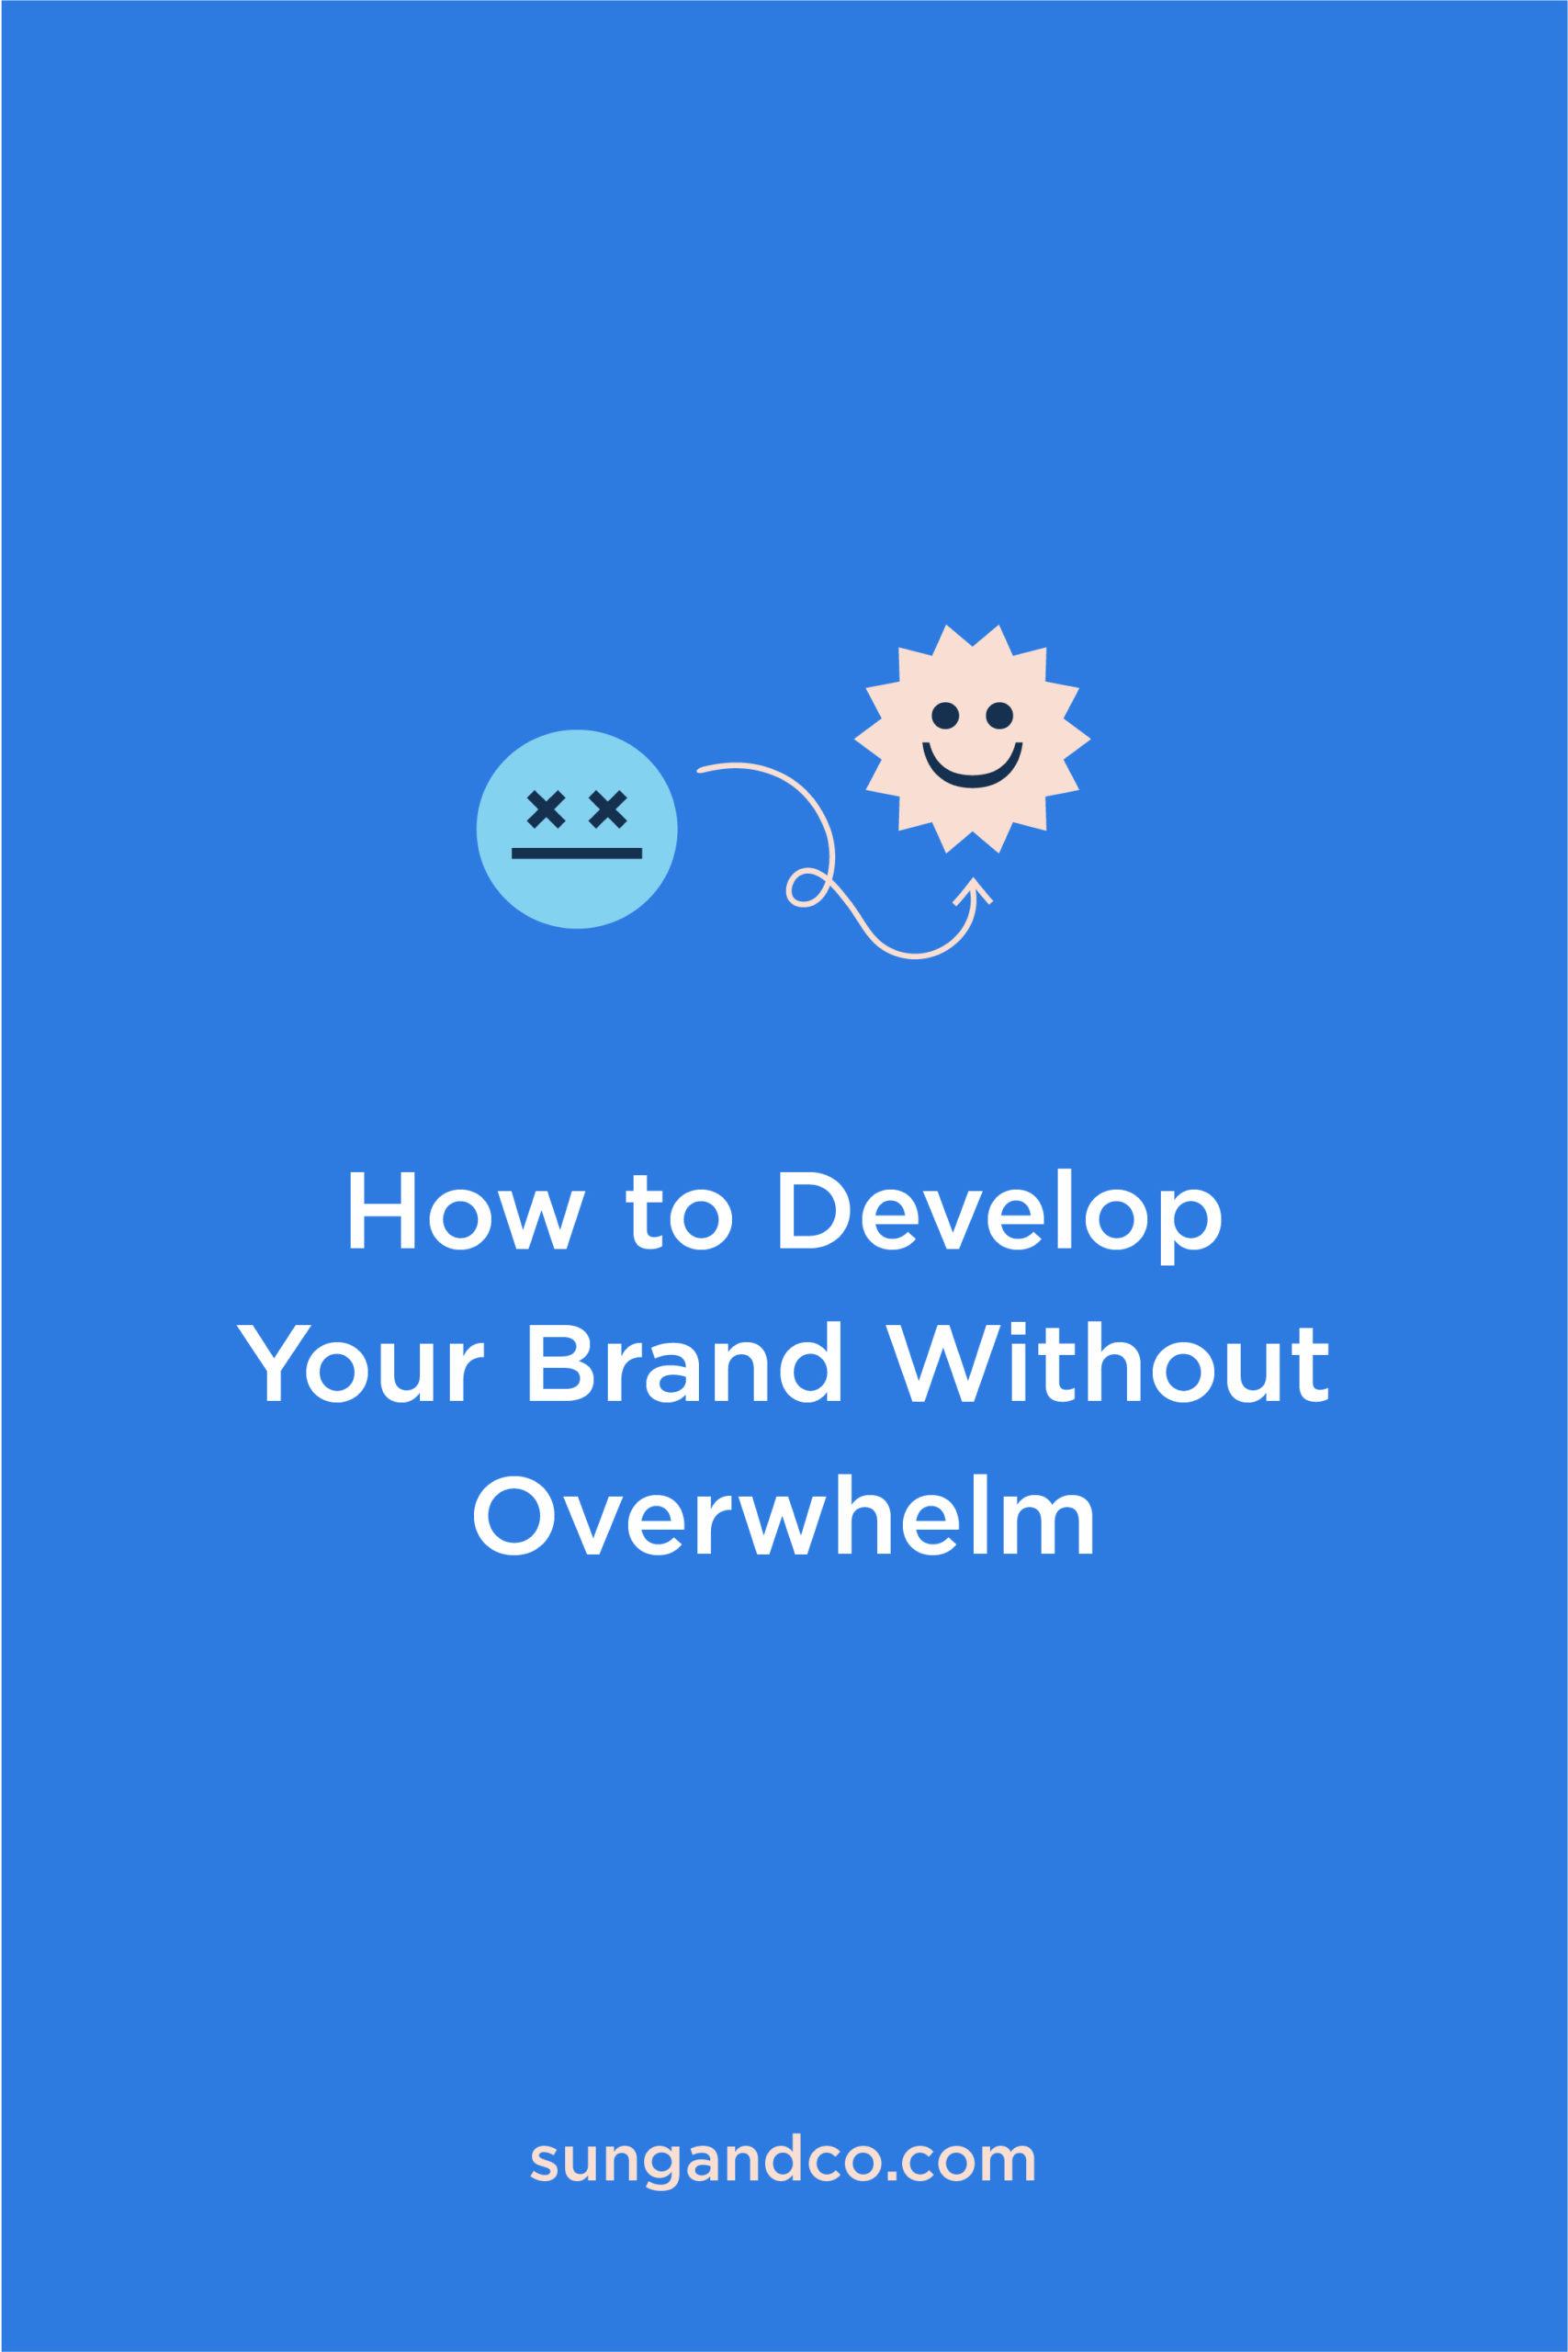 How to develop your brand without overwhelm - Sung and Co.